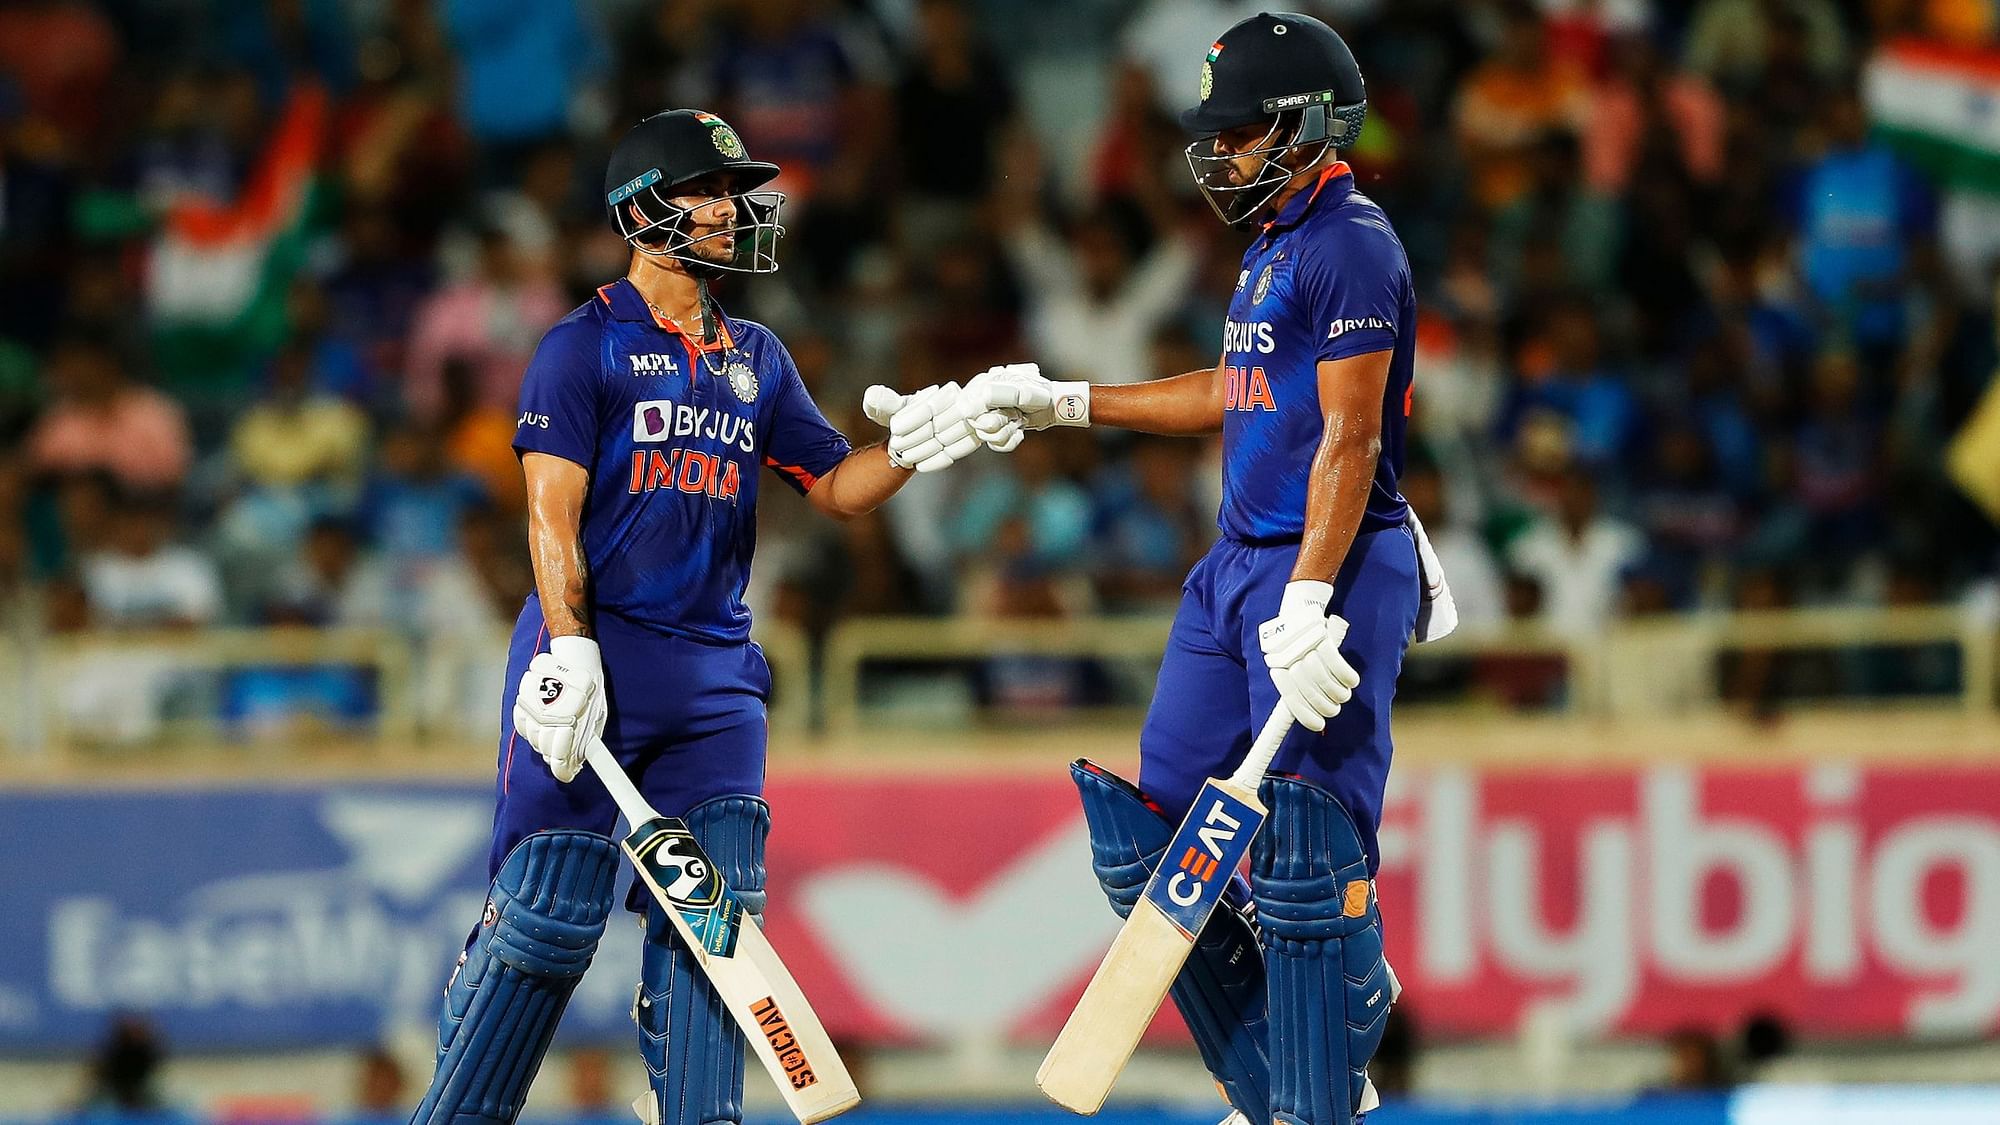 <div class="paragraphs"><p>The crucial third-wicket partnership between Ishan Kishan and Shreyas Iyer guided India to a win against South Africa in the second ODI at the JSCA Stadium Complex in Ranchi on Sunday.</p></div>